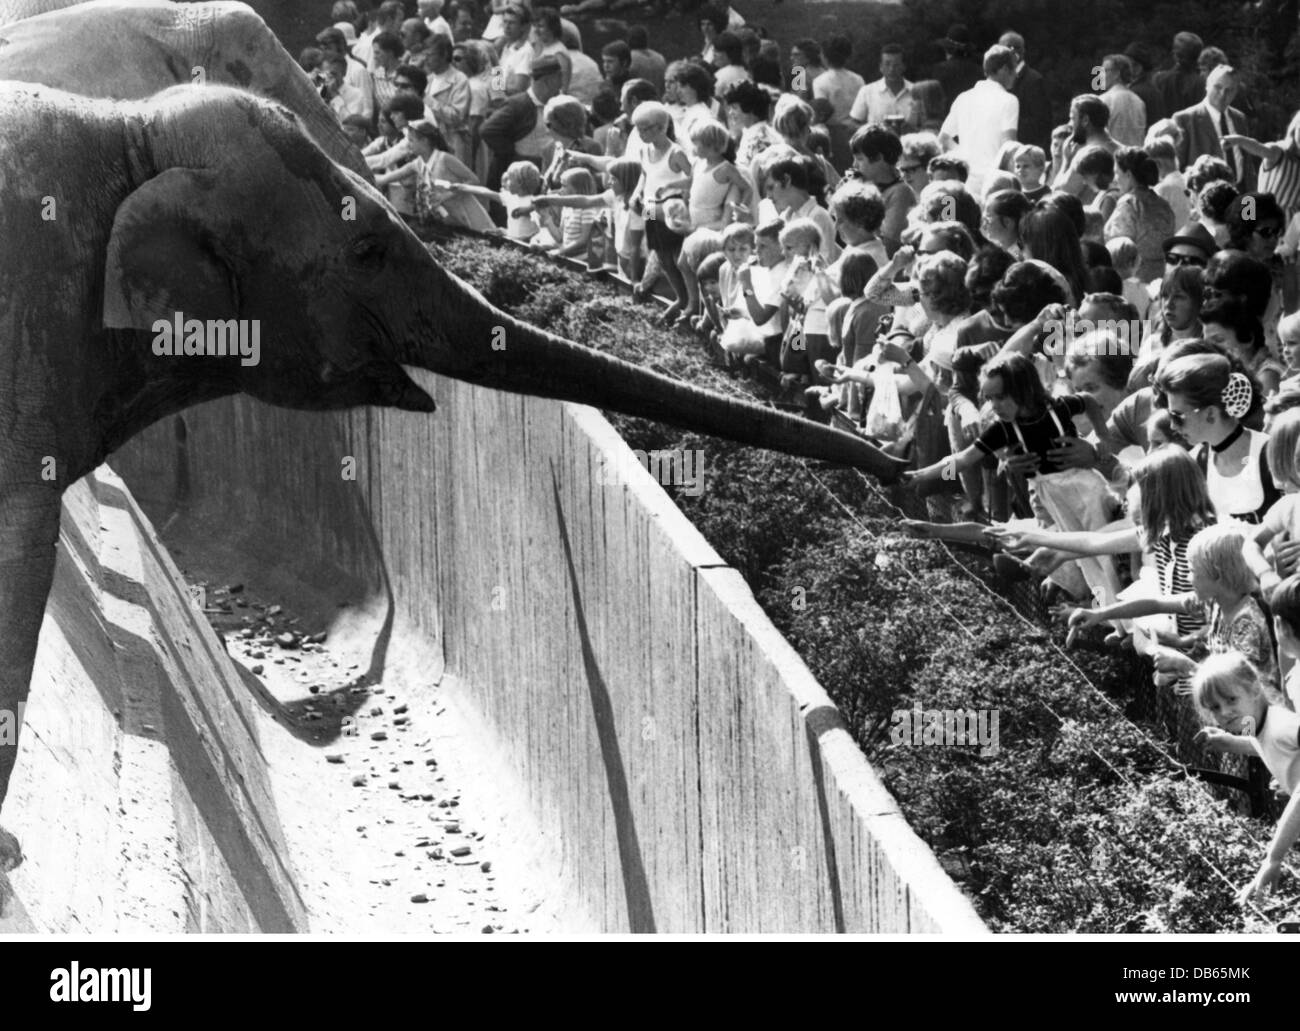 zoology, zoo, Tierpark Hagenbeck, Hamburg, Germany, children feeding elephants, July 1971, Additional-Rights-Clearences-Not Available Stock Photo